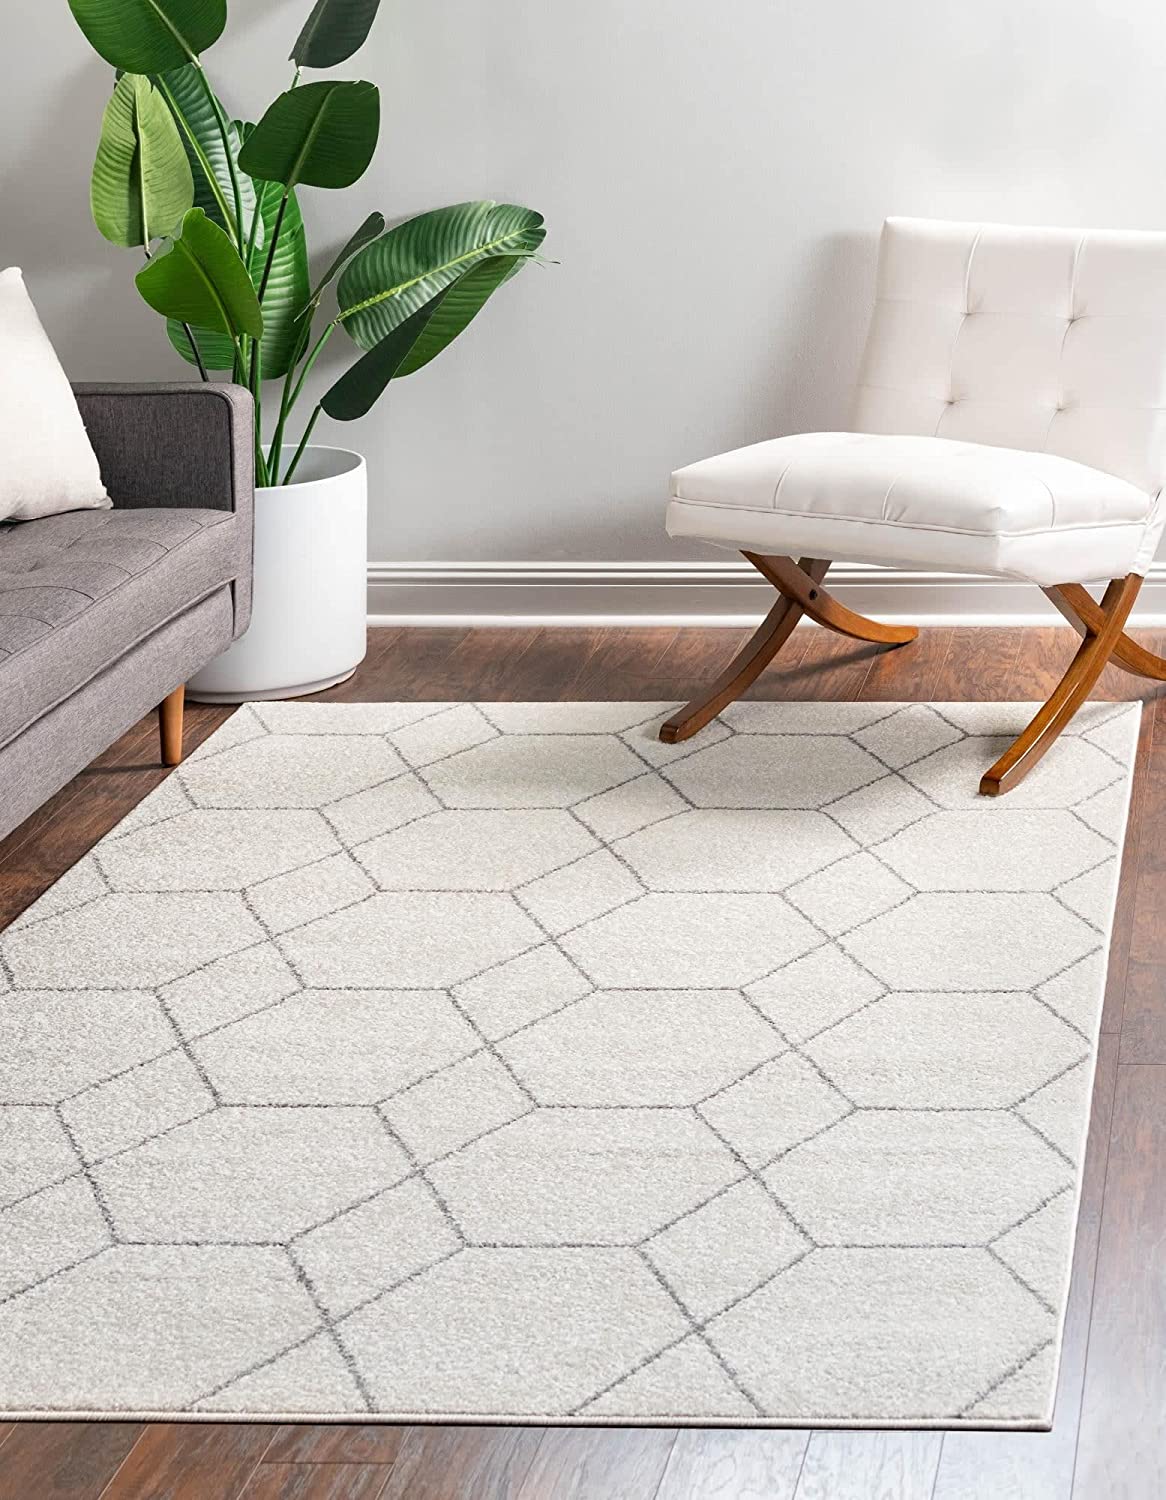 2' x 3' Unique Loom Trellis Frieze Collection Geometric Area Rug (Ivory/Gray) $12.96 + Free Shipping w/ Prime or on $25+